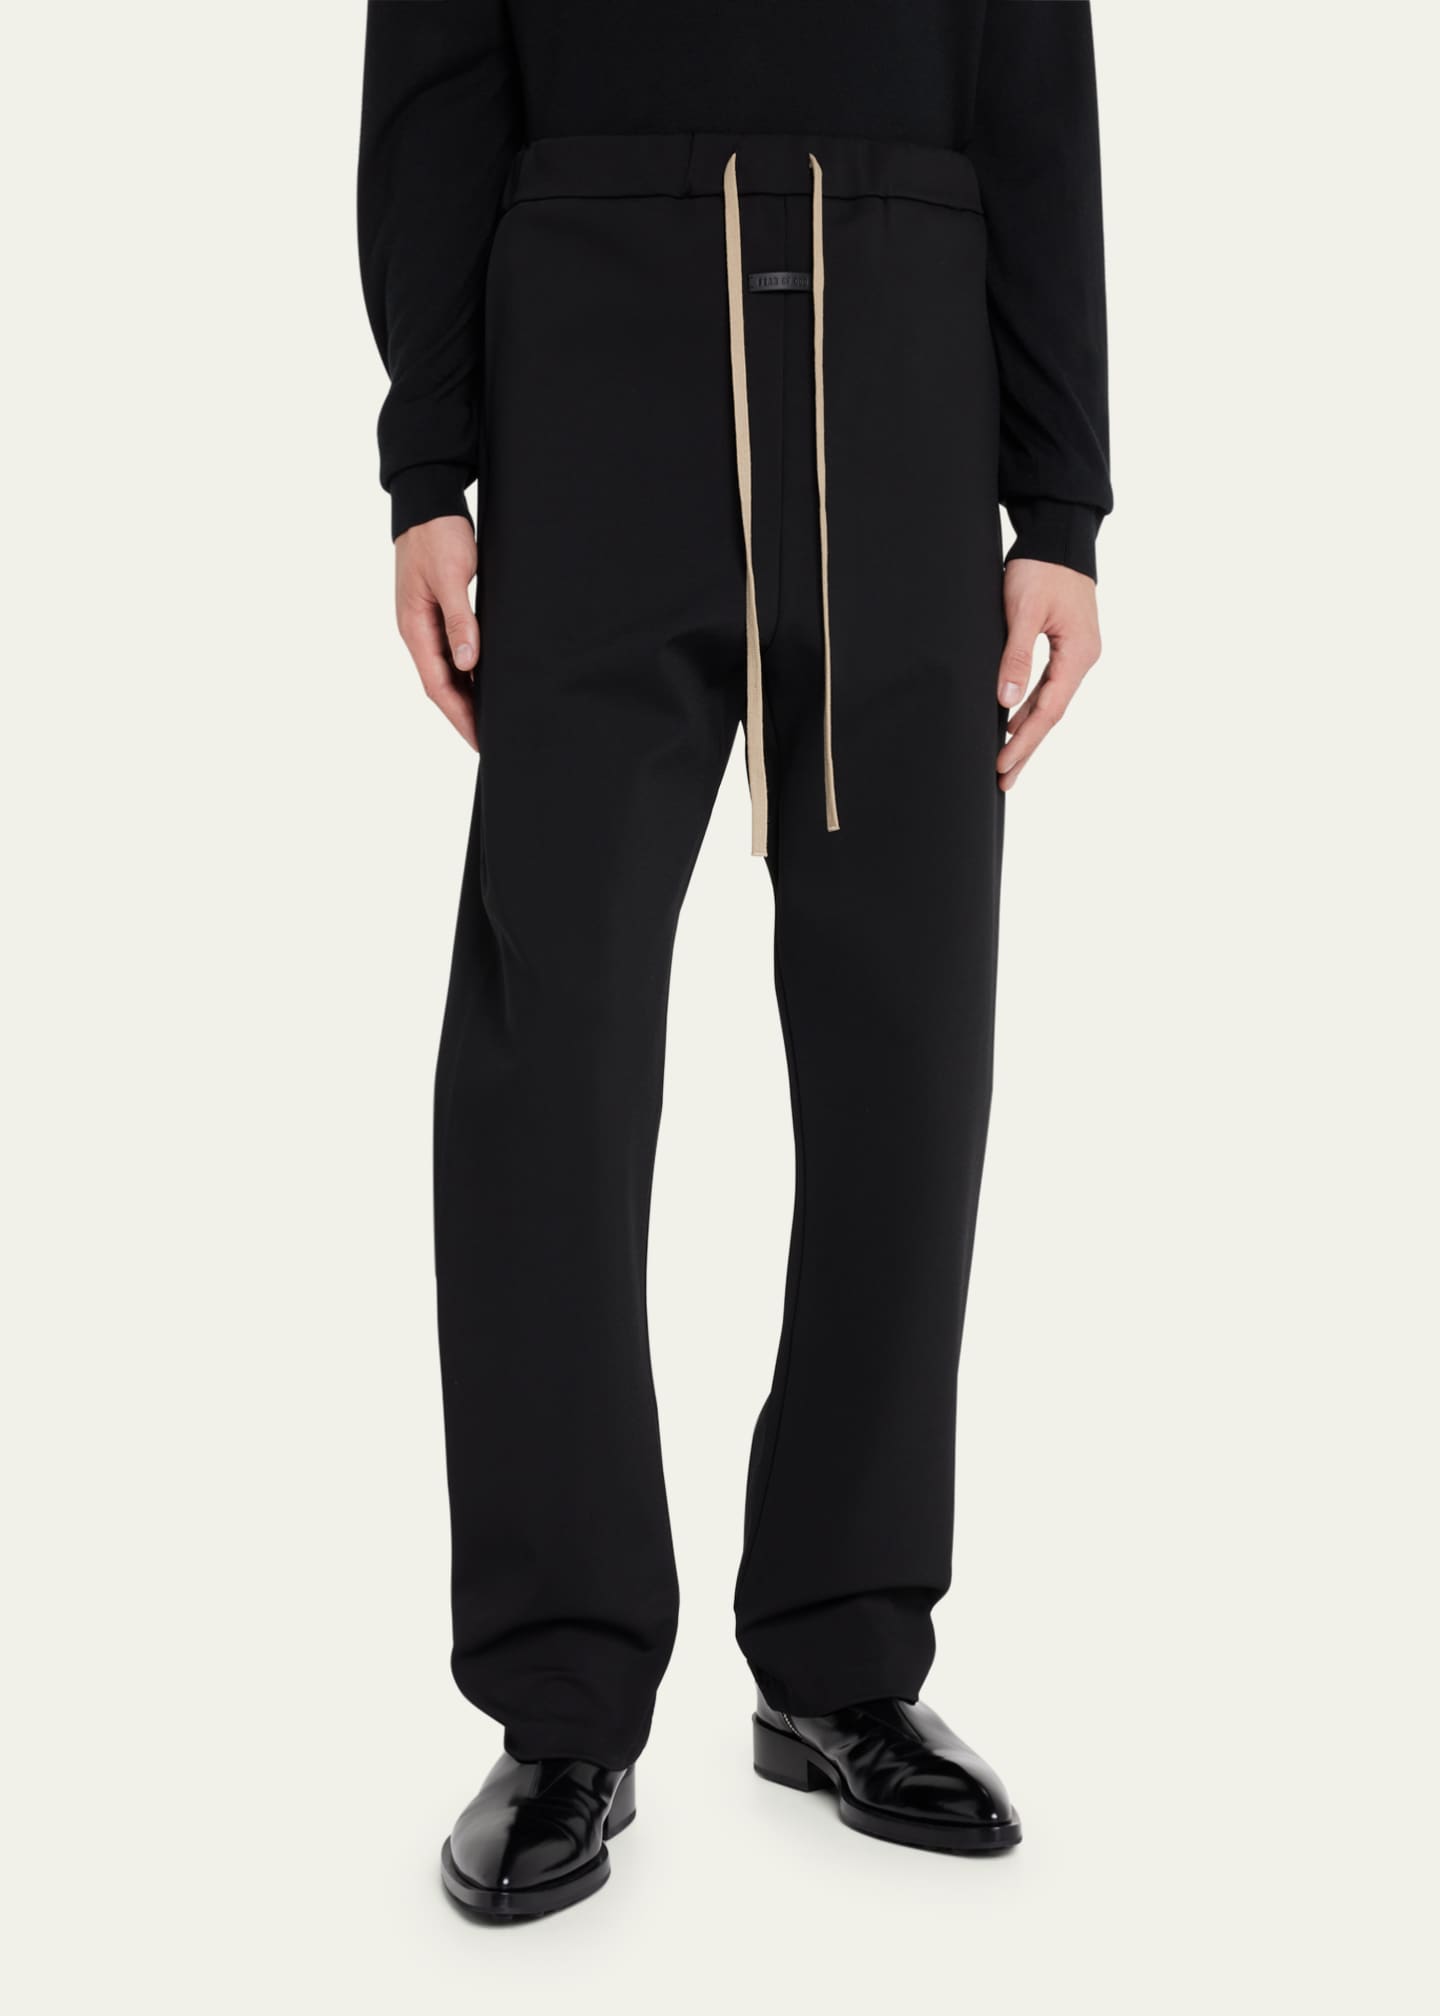 Fear of God Men's Tricot Relaxed-Fit Pants - Bergdorf Goodman